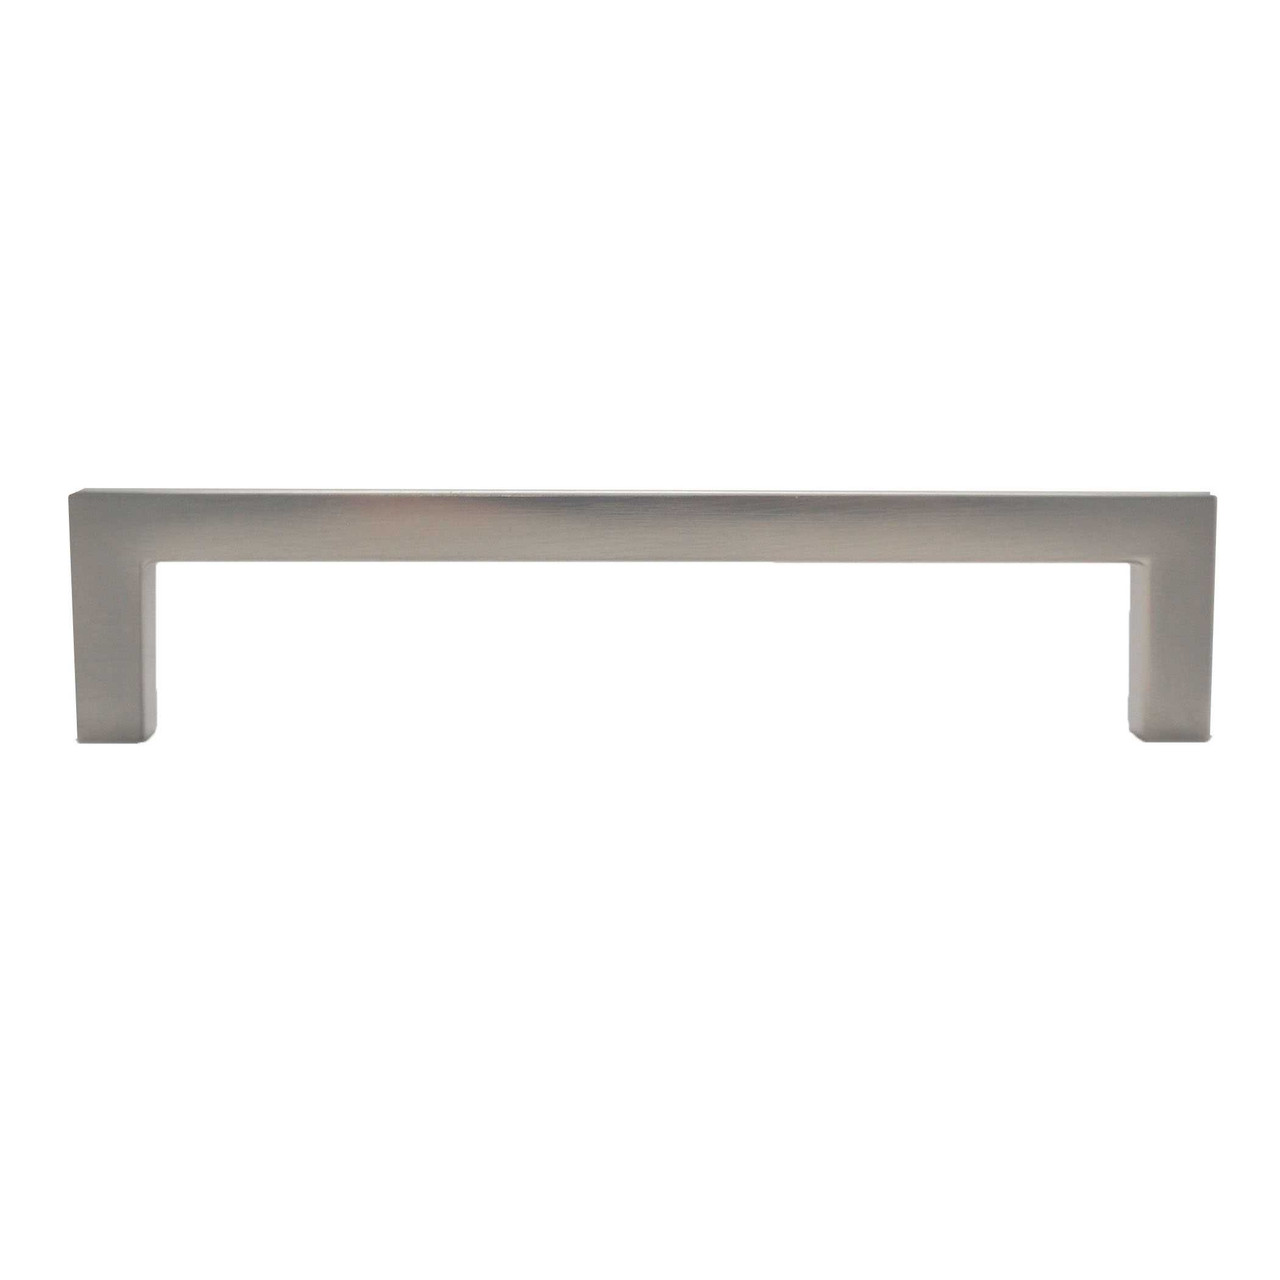 Square Cabinet Pulls - Center to Center - Hickory Hardware